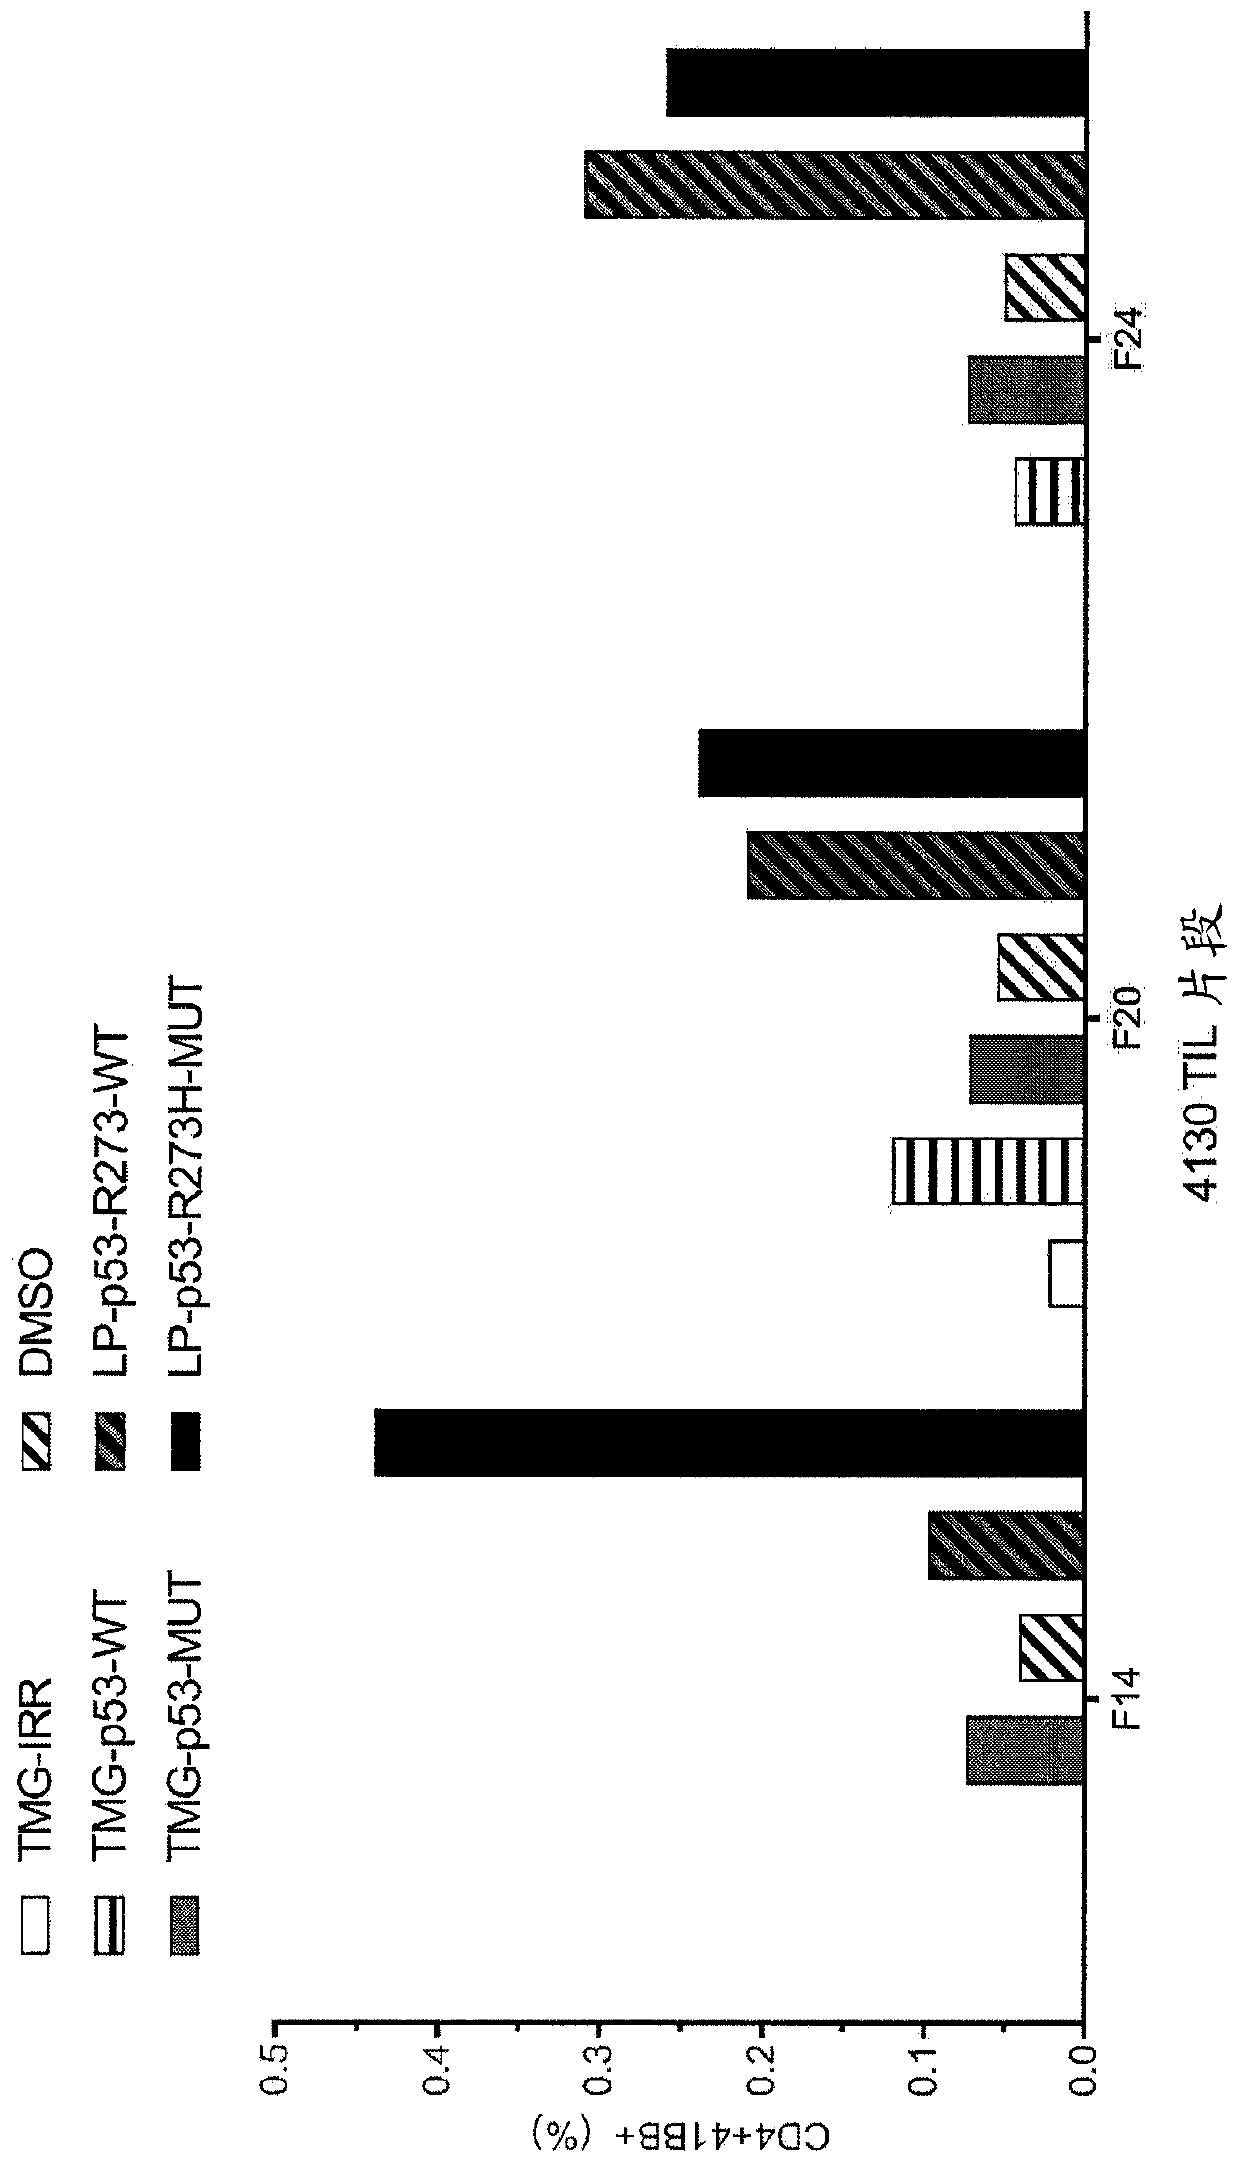 Methods of isolating T cells having antigenic specificity for P53 cancer-specific mutation